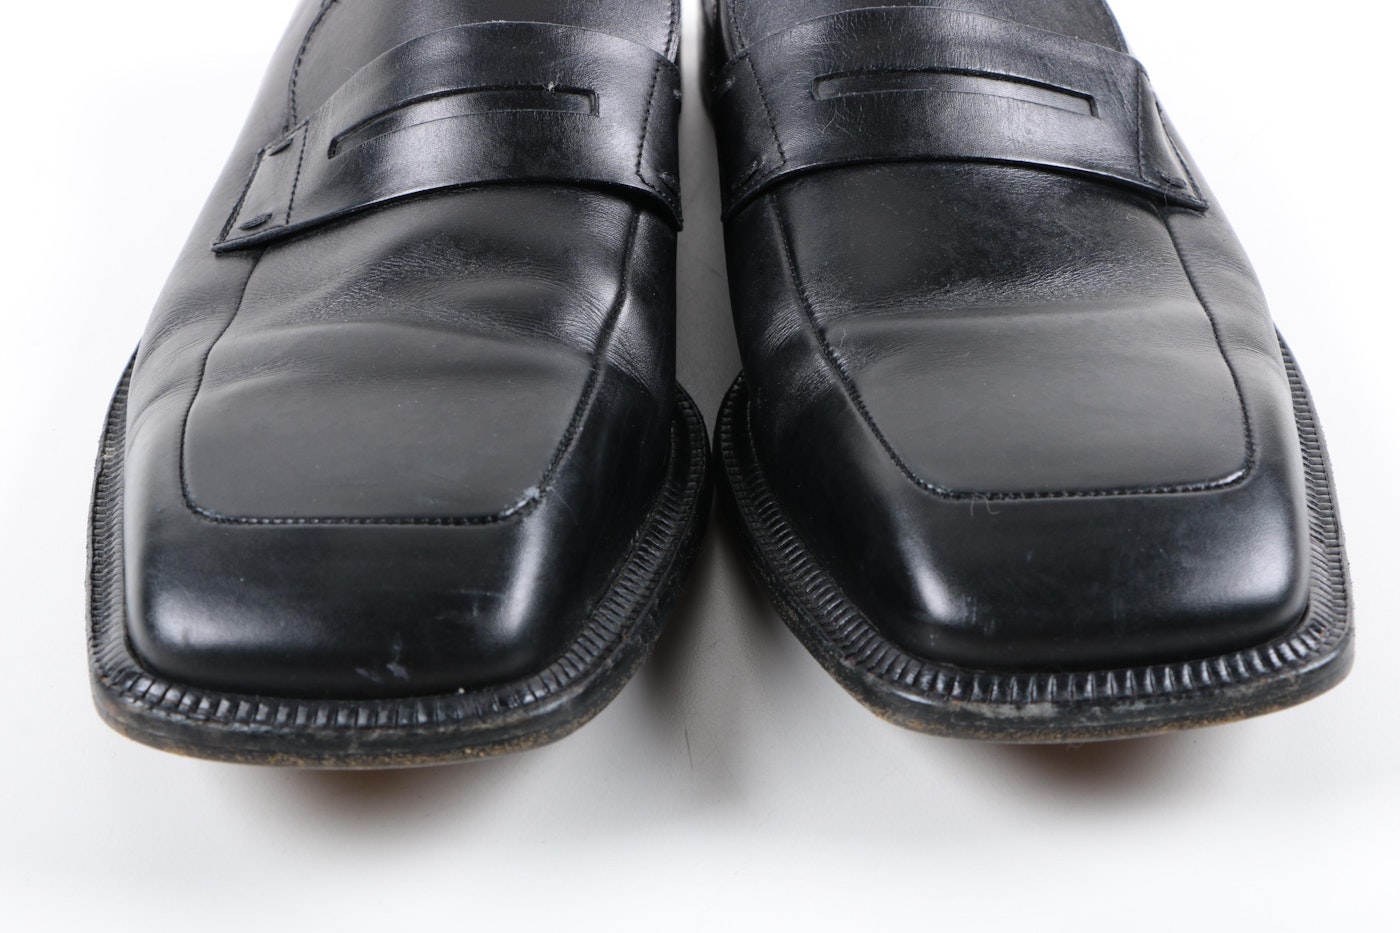 Louis Vuitton Mens Loafers & Slip-Ons 2023 Ss, Black, UK9.5 (Confirmation Required)